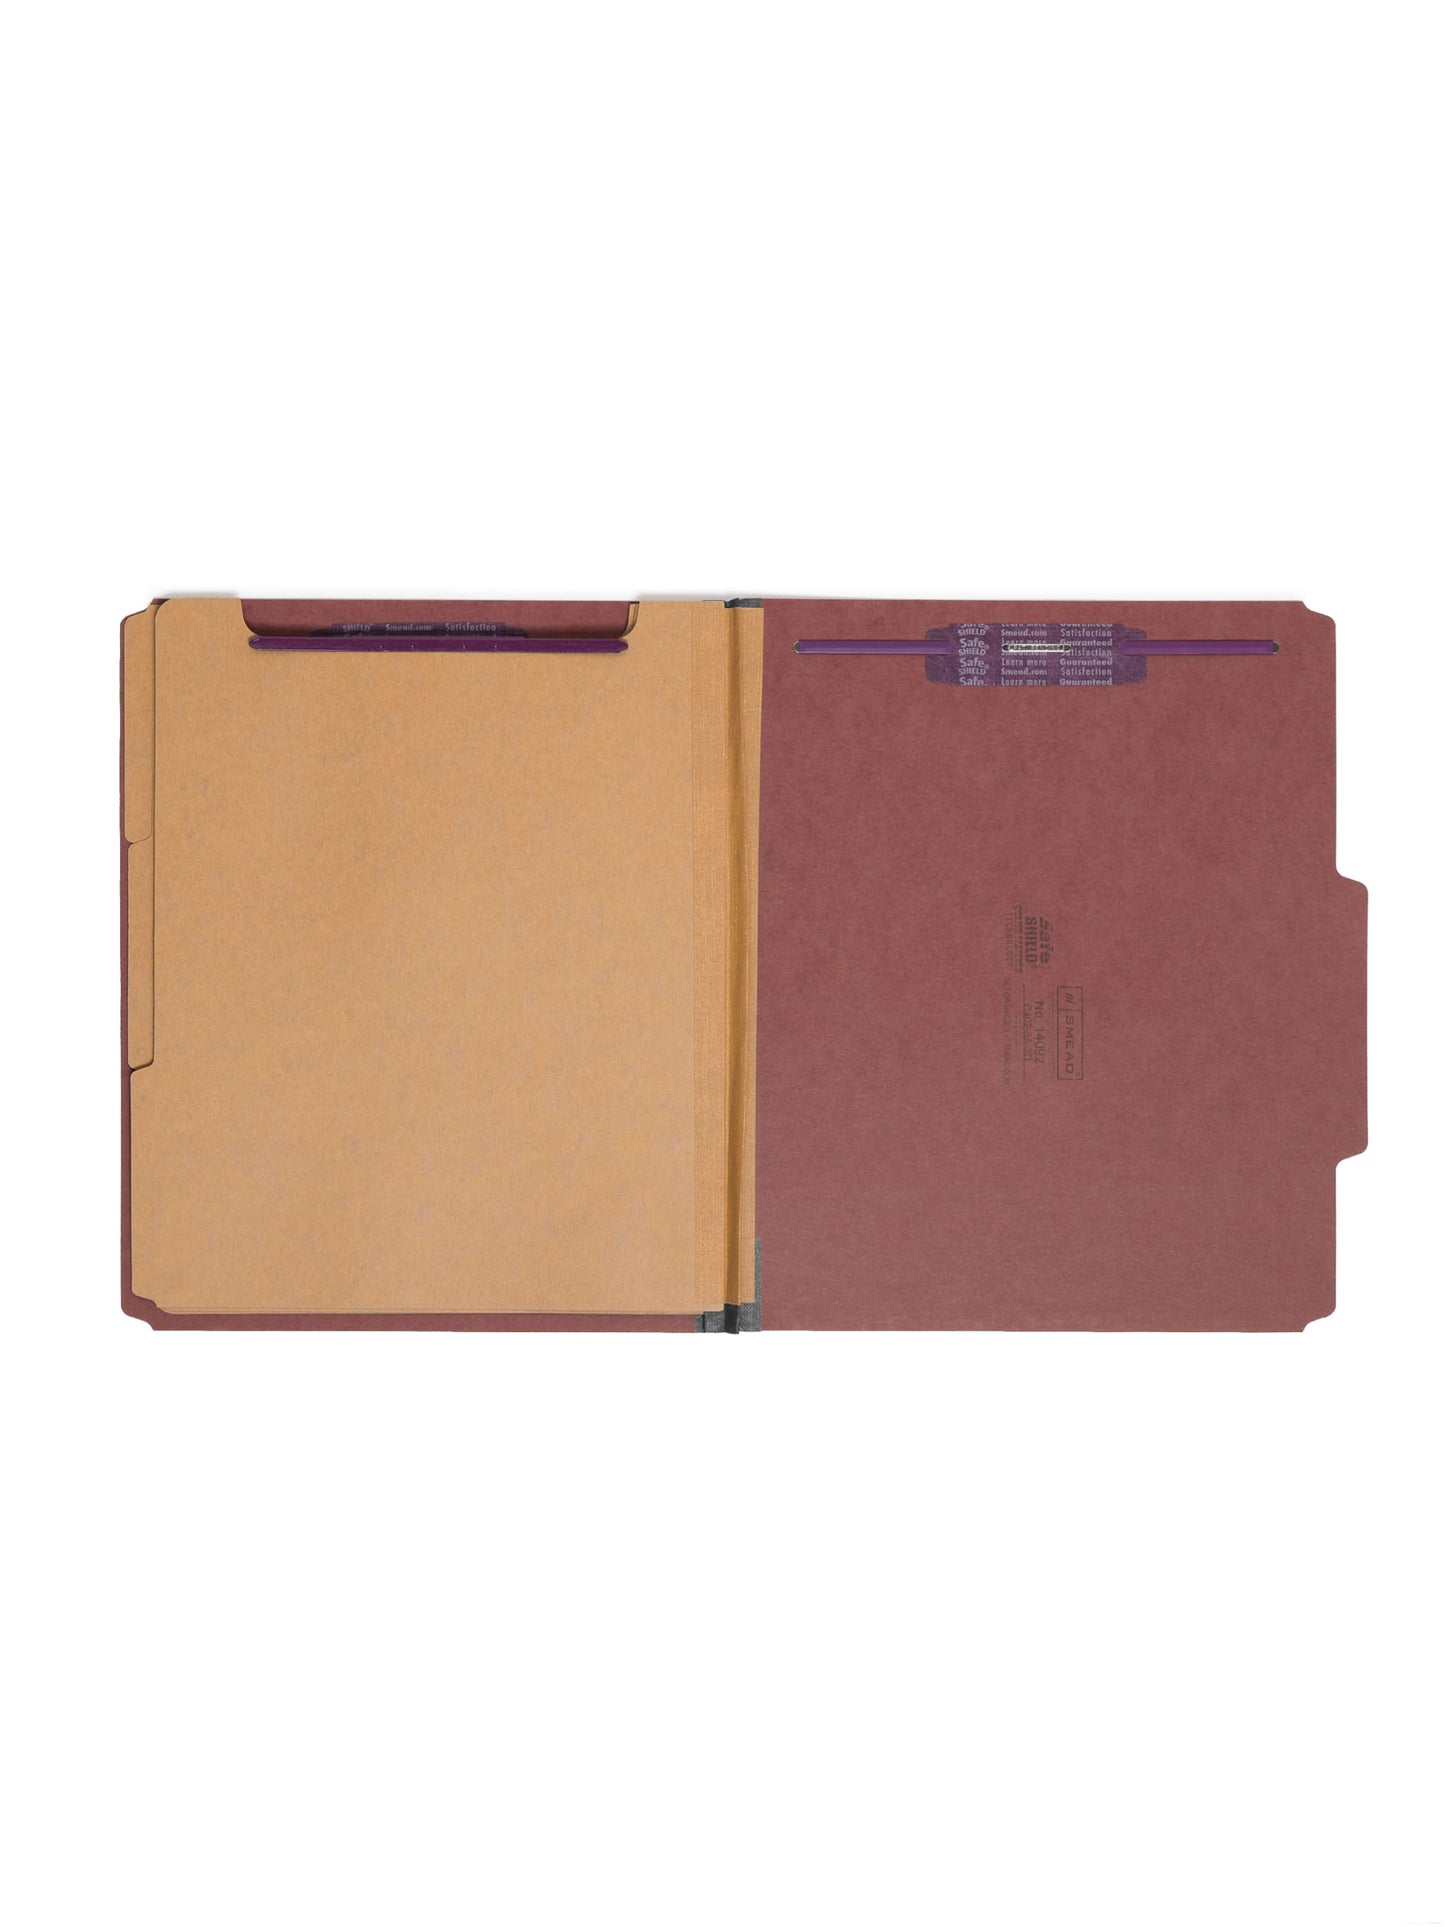 SafeSHIELD® Pressboard Classification File Folders, 3 Dividers, 3 inch Expansion, 2/5-Cut Tab, Red Color, Letter Size, Set of 0, 30086486140929